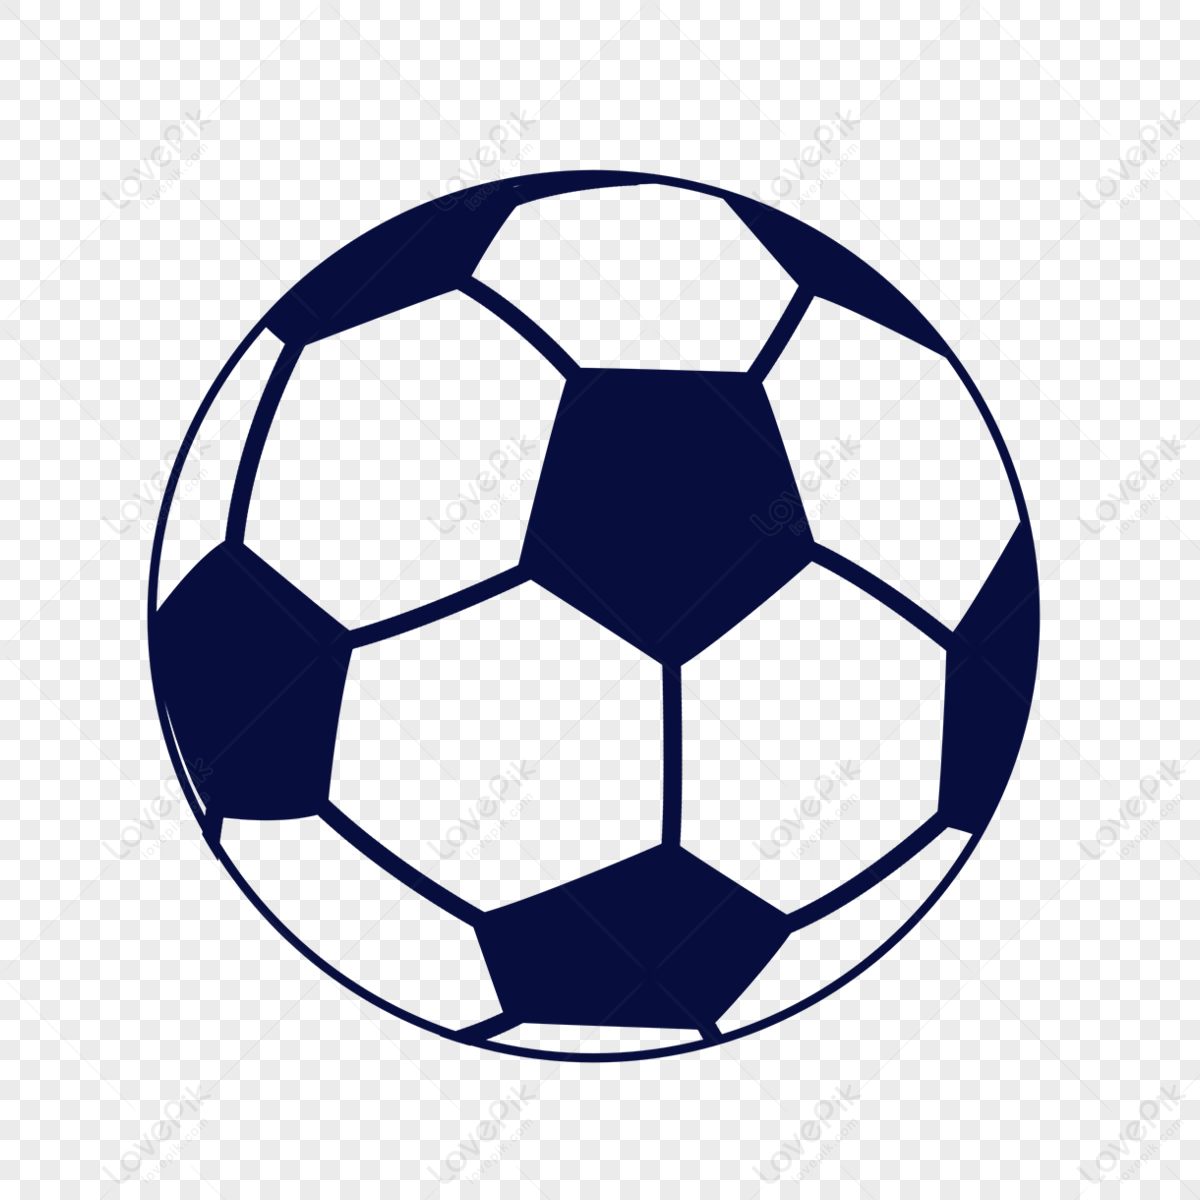 Football PNG Transparent Images Free Download - Pngfre